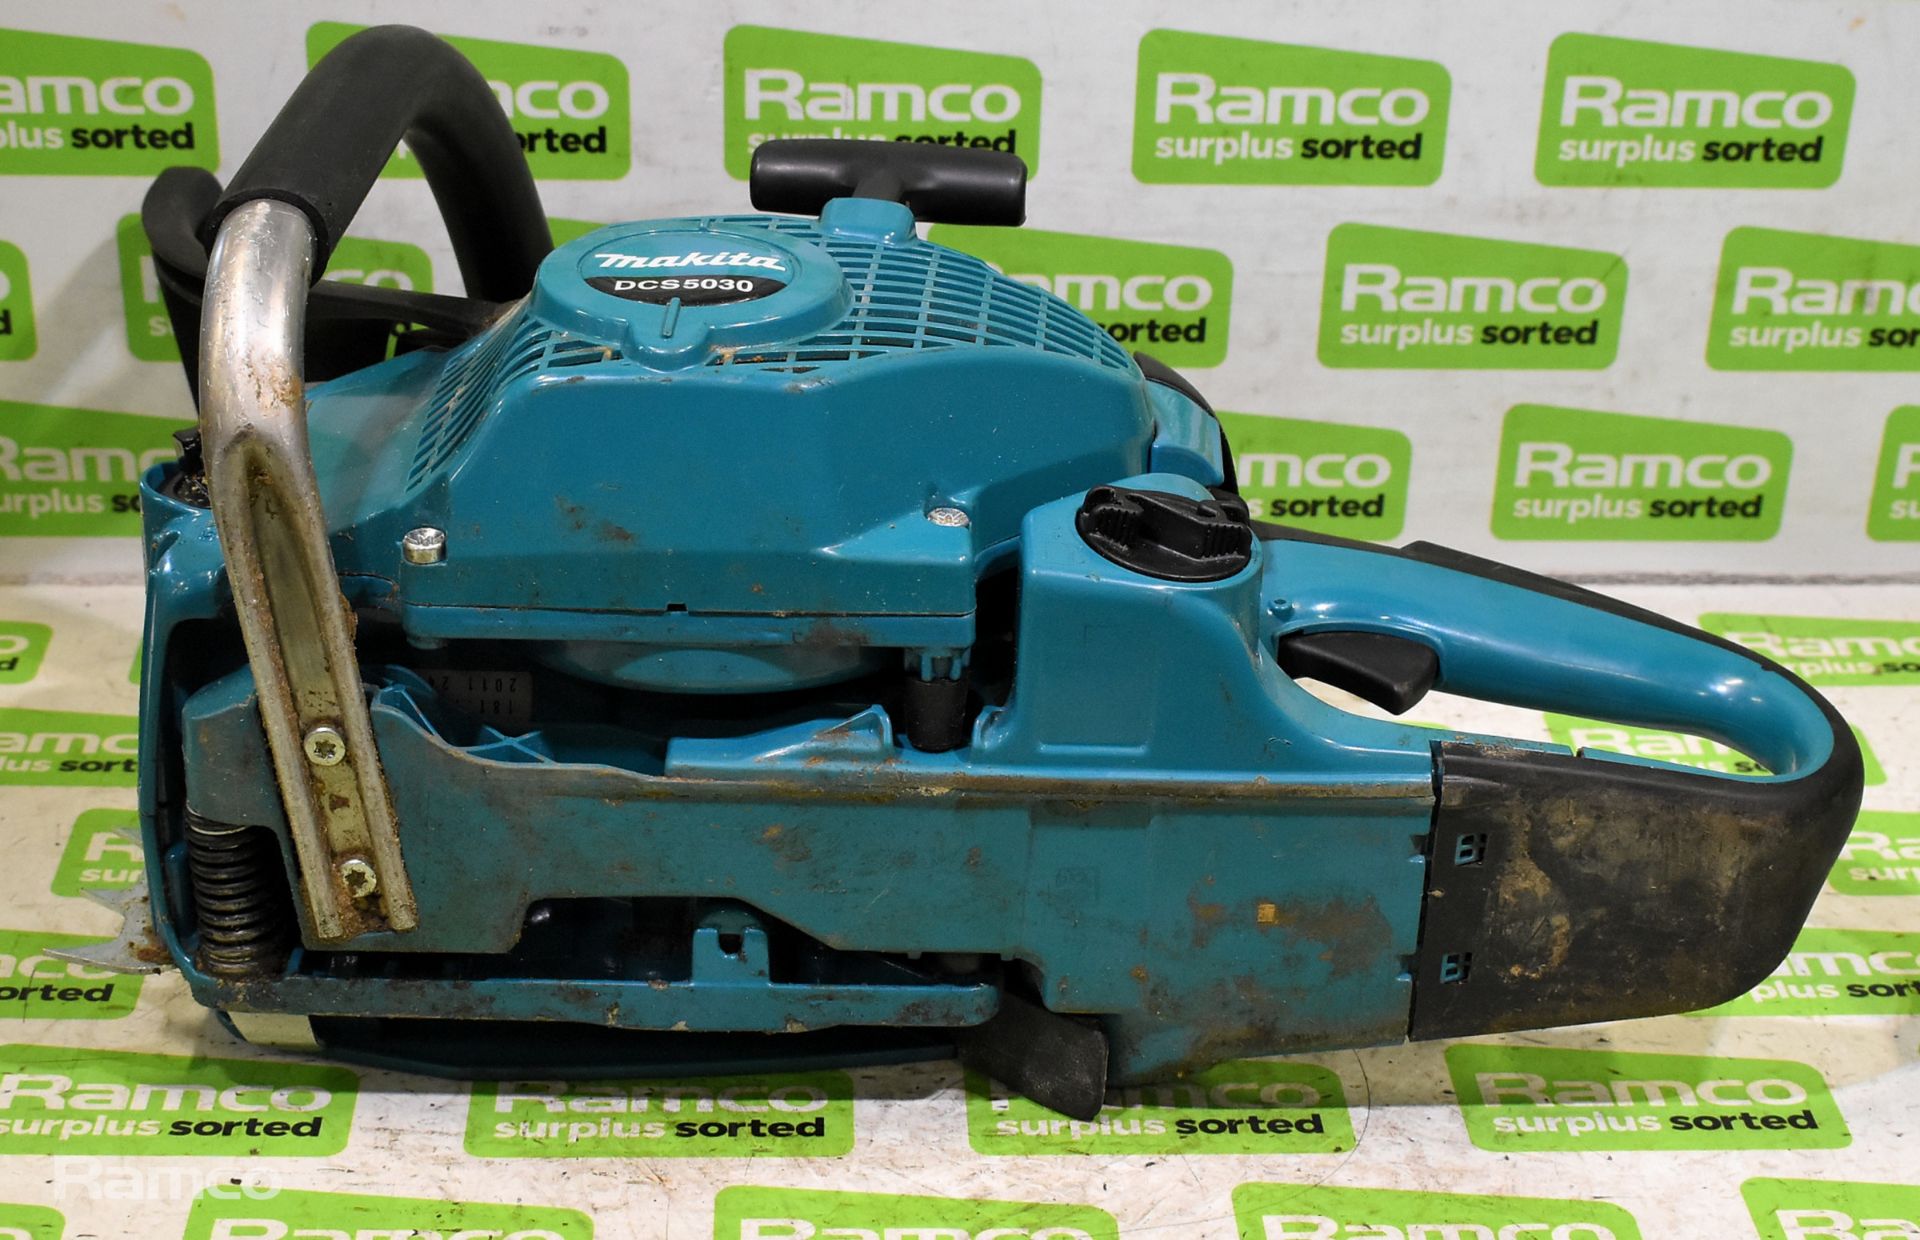 6x Makita DCS5030 50cc petrol chainsaw - BODIES ONLY - AS SPARES & REPAIRS - Image 23 of 33